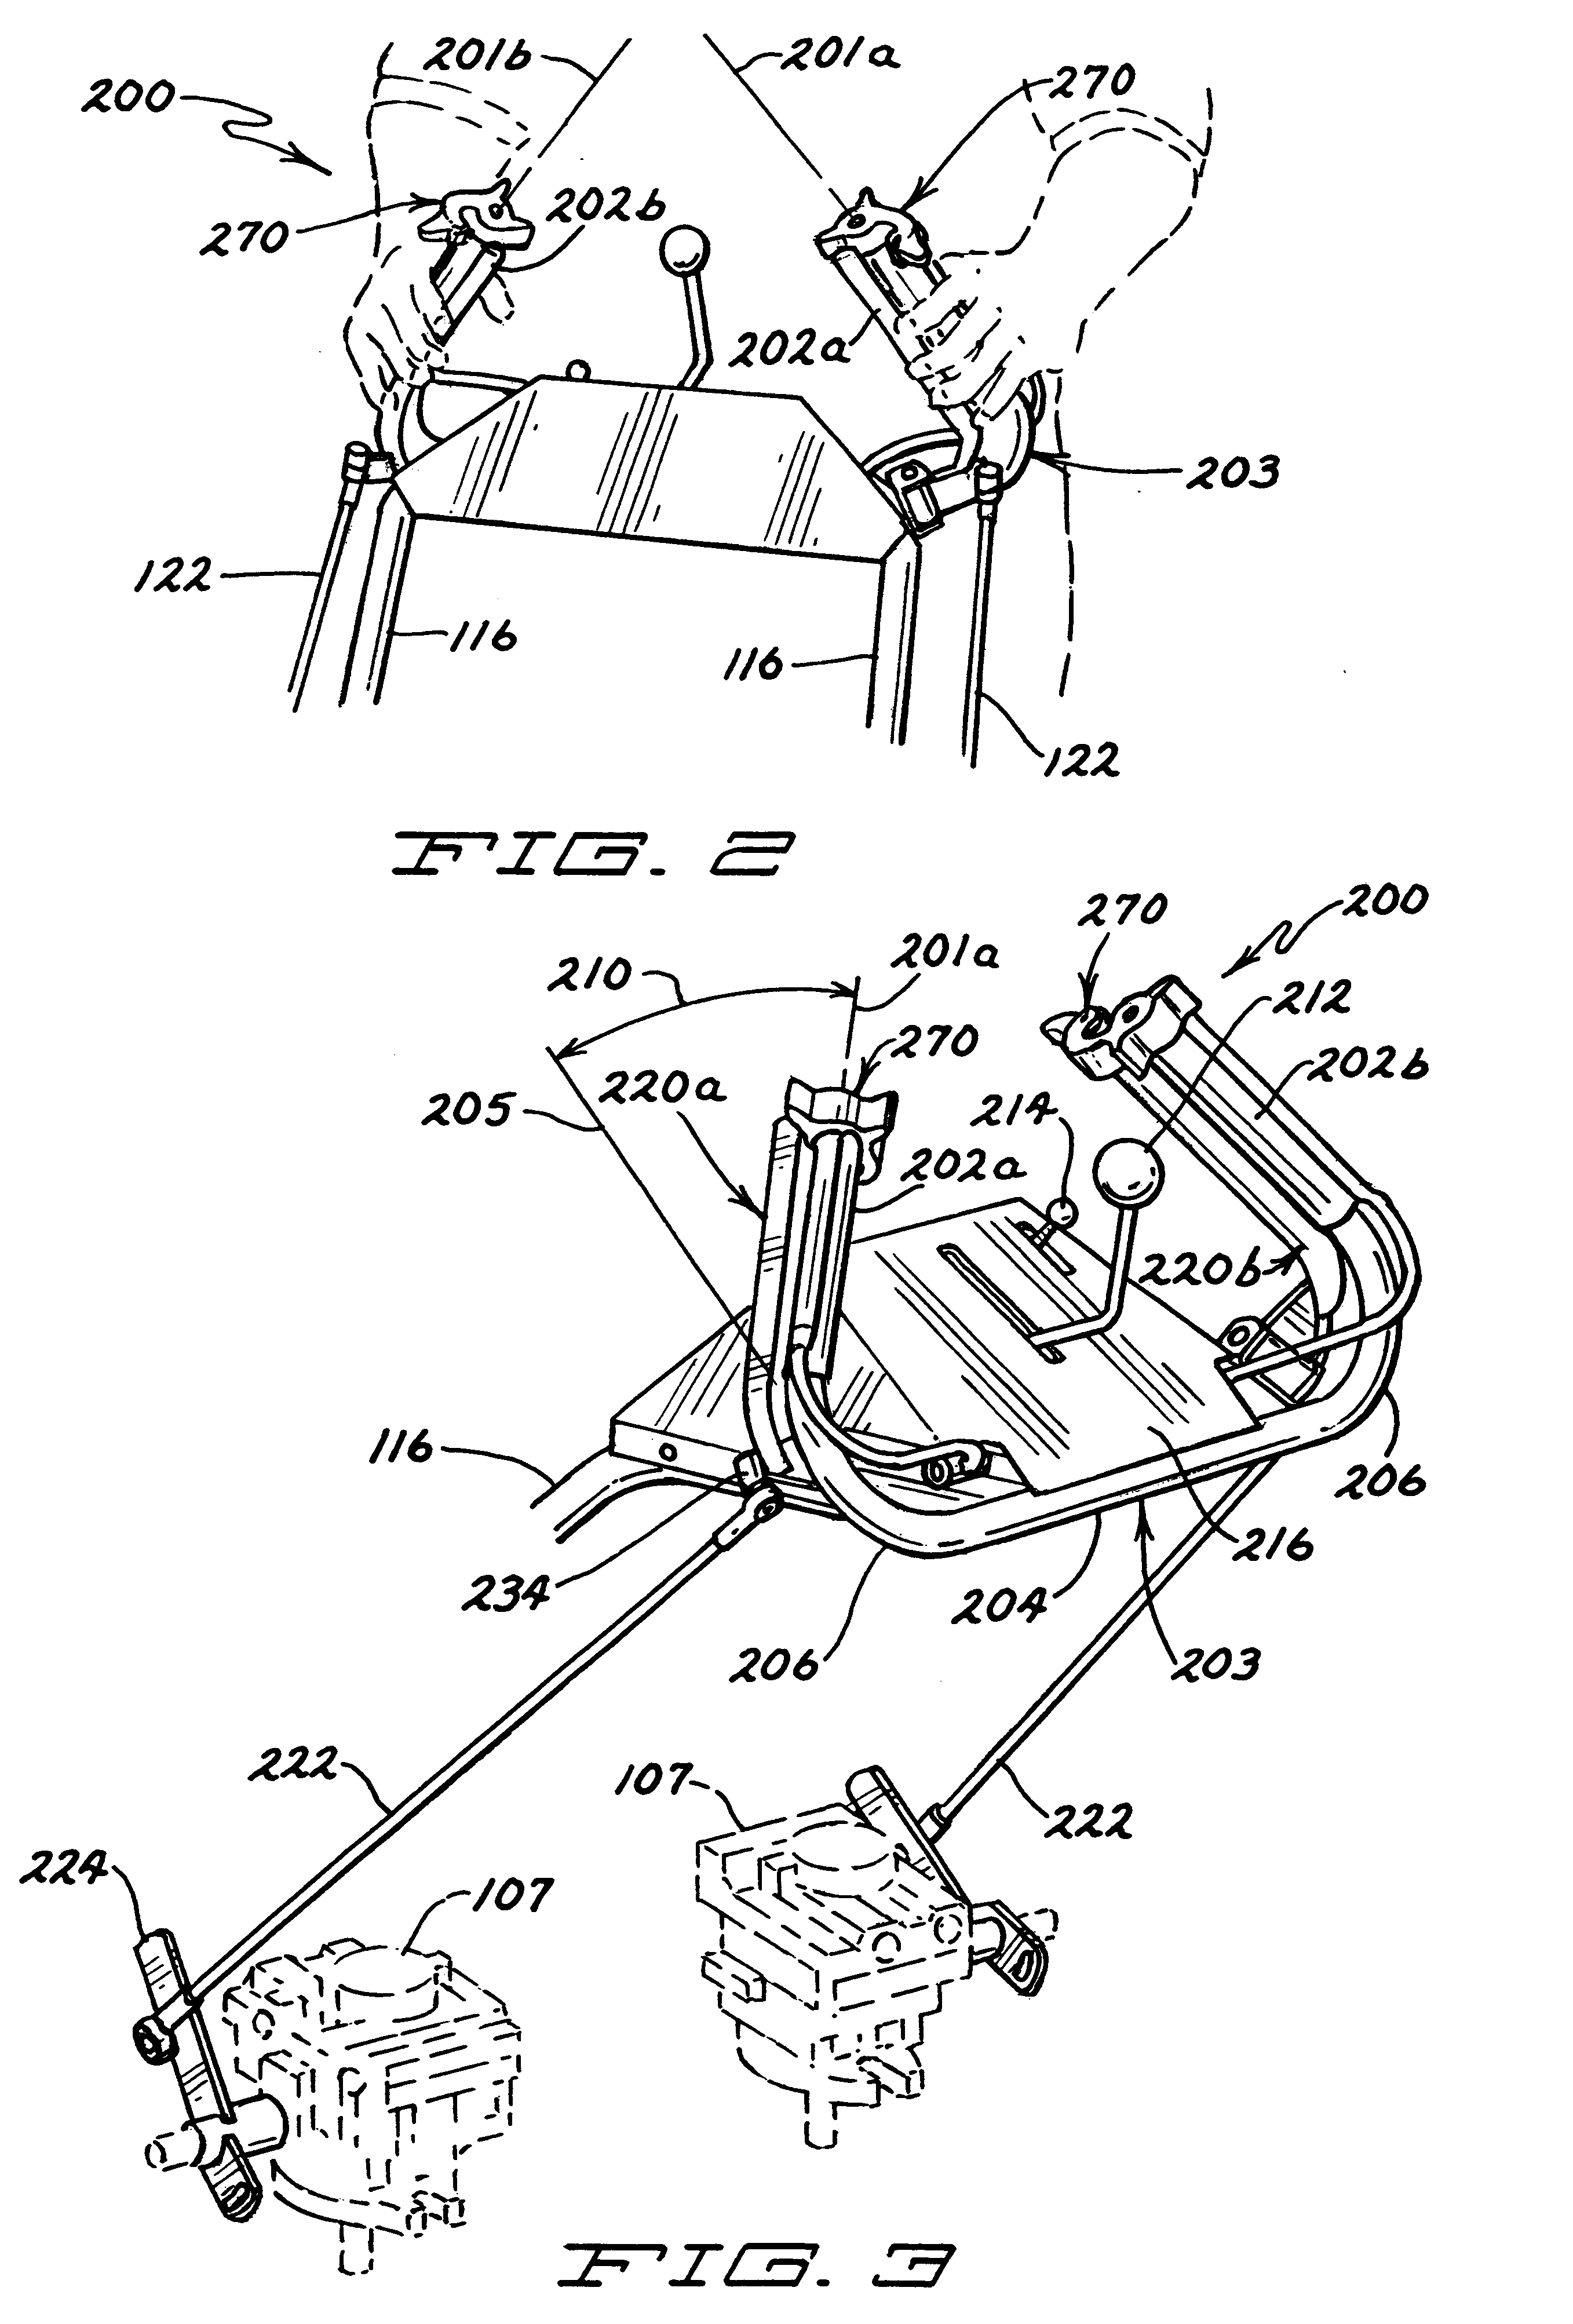 Operator control system for self-propelled vehicles